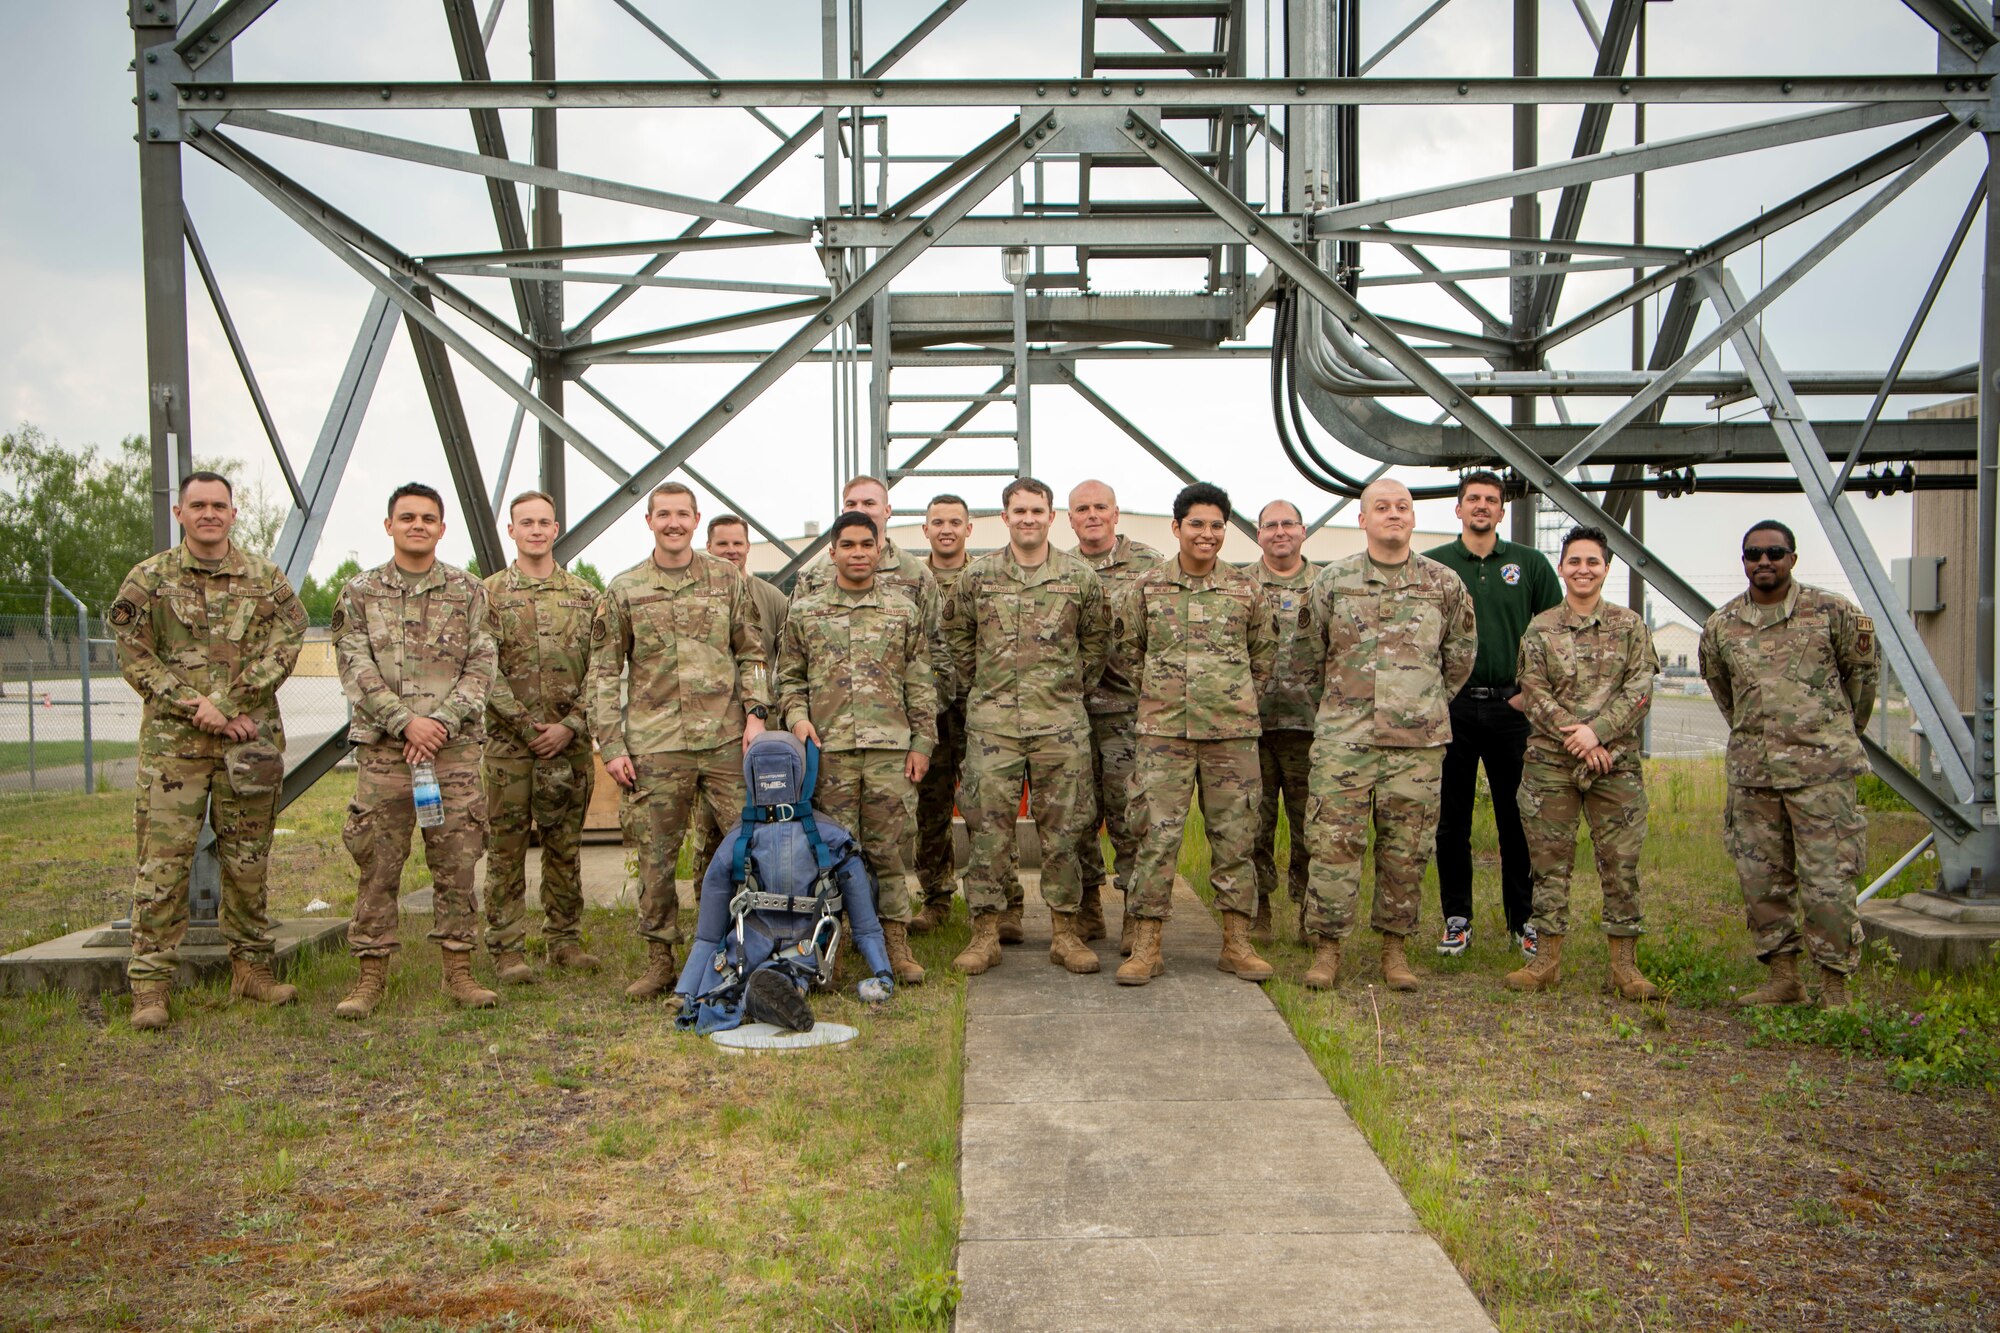 Members from 52nd Fighter Wing Safety, 52nd Operations Support Squadron and 52nd Civil Engineer Squadron pose for a photo, May 4, 2022, on Spangdahlem Air Base, Germany. The 52nd FW Safety office observed the nationally recognized National Safety Stand-Down week to prevent falls in construction. (U.S. Air Force photo by Airman 1st Class Jessica Sanchez-Chen)